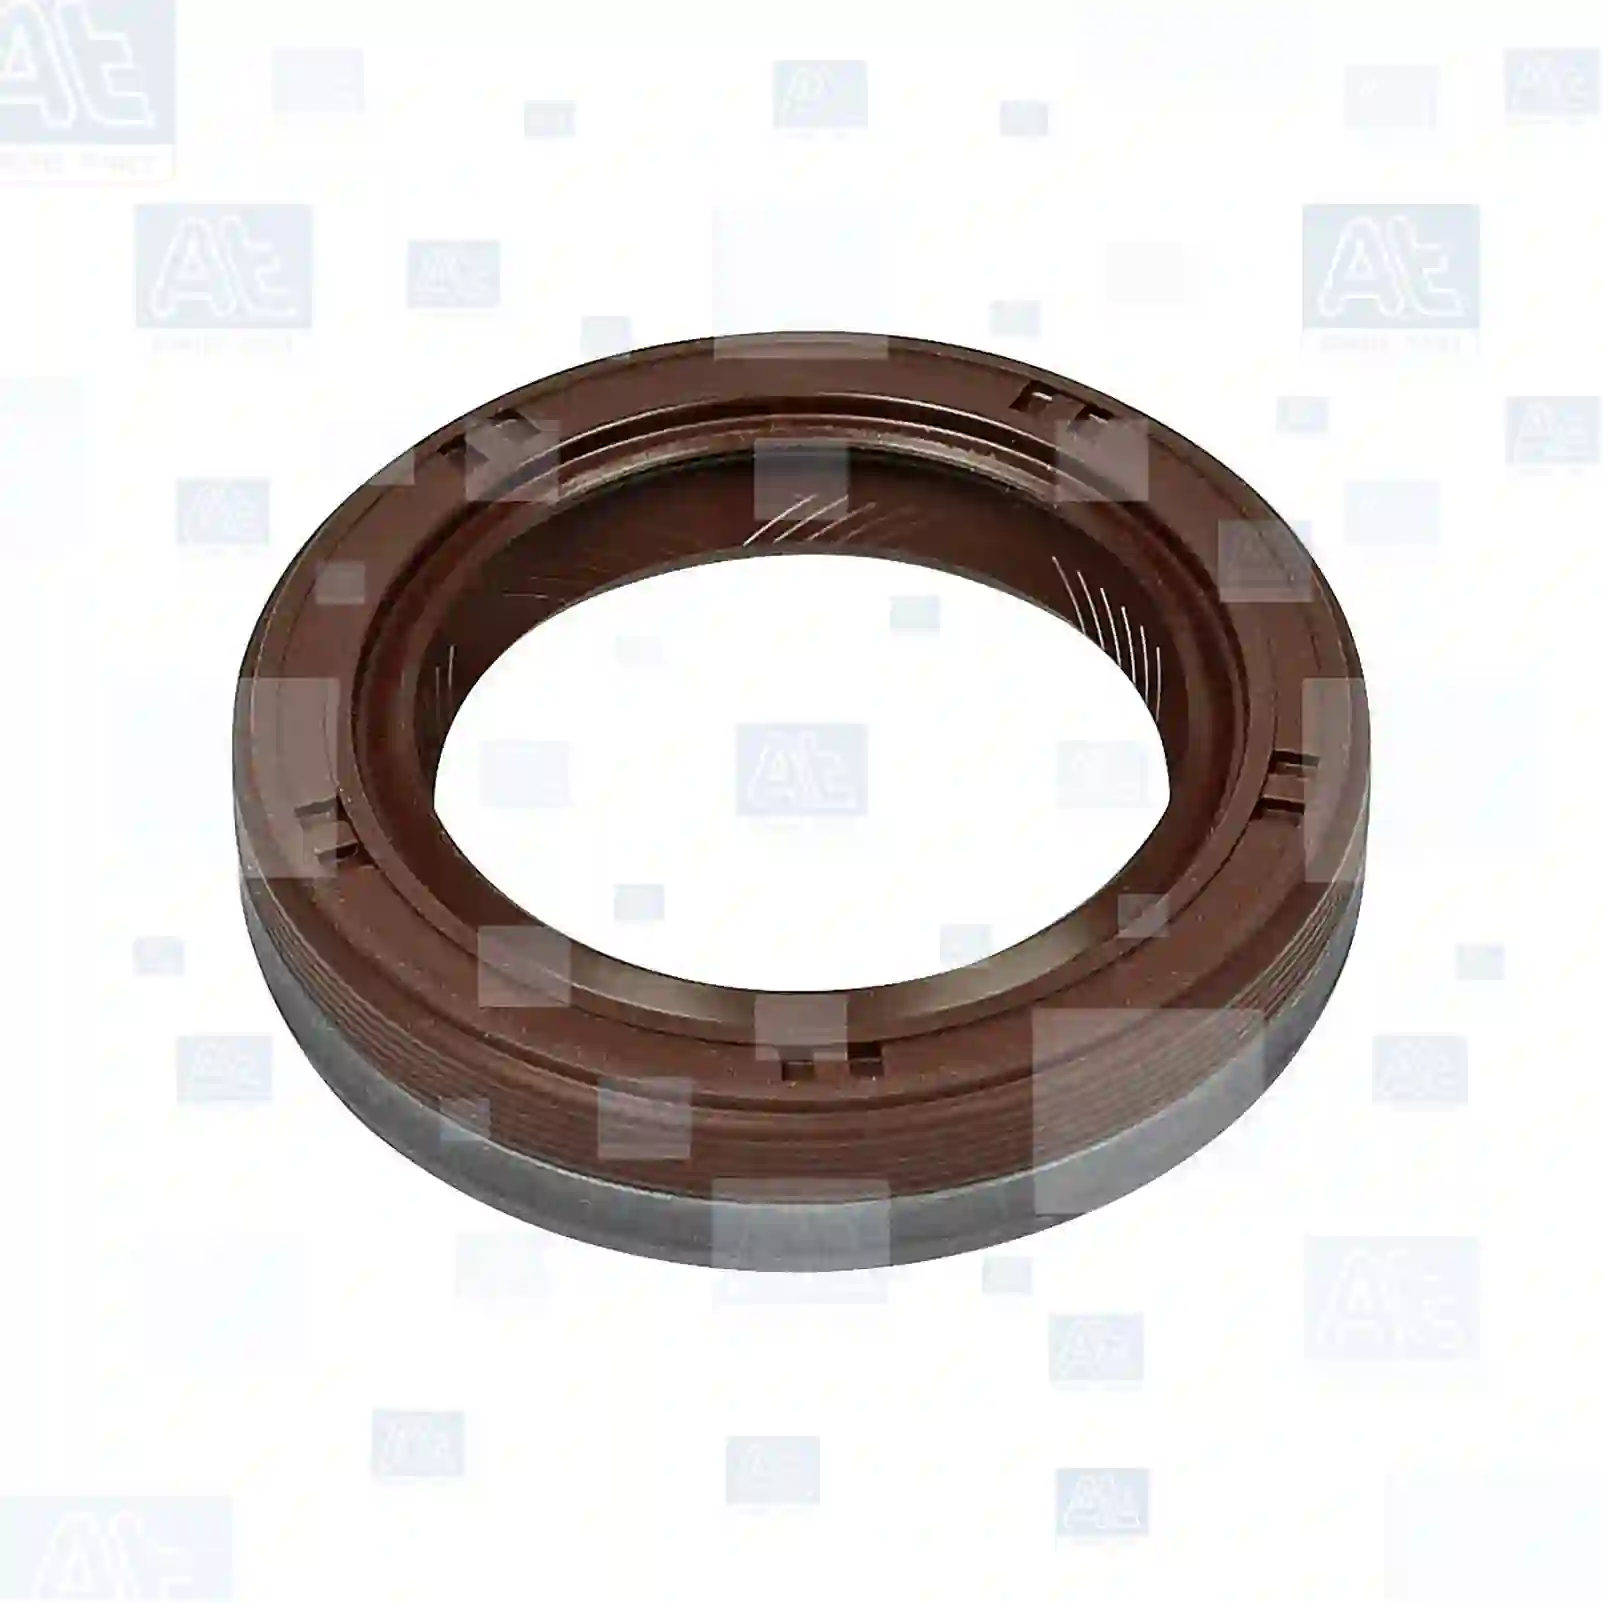 Oil seal, at no 77700118, oem no: 60610985, 026103085, 026103085D, 026103085E, 026103085F, 041103085, 056103085, 056103085B, 068103085A, 068103085E, 068103085G, 068103085Q, 068103085R, 1004928, 1005694, 1032523, 1669840, 068103085E, 95510418500, 026103085D, 026103085E, 026103085F, 030103085A, 056103085B, 068103085A, 068103085E, 068103085G, 068103085Q, 026103085D, 026103085E, 026103085F, 030103085A, 056103085B, 068103085A, 068103085E, 068103085G, 1257221, 6842265, 6842266, 026103085, 026103085A, 026103085D, 026103085E, 026103085F, 030103085A, 041103085, 056103085, 056103085A, 056103085B, 056103085E, 068103085, 068103085A, 068103085C, 068103085E, 068103085F, 068103085G, 068103085Q, 068103085R At Spare Part | Engine, Accelerator Pedal, Camshaft, Connecting Rod, Crankcase, Crankshaft, Cylinder Head, Engine Suspension Mountings, Exhaust Manifold, Exhaust Gas Recirculation, Filter Kits, Flywheel Housing, General Overhaul Kits, Engine, Intake Manifold, Oil Cleaner, Oil Cooler, Oil Filter, Oil Pump, Oil Sump, Piston & Liner, Sensor & Switch, Timing Case, Turbocharger, Cooling System, Belt Tensioner, Coolant Filter, Coolant Pipe, Corrosion Prevention Agent, Drive, Expansion Tank, Fan, Intercooler, Monitors & Gauges, Radiator, Thermostat, V-Belt / Timing belt, Water Pump, Fuel System, Electronical Injector Unit, Feed Pump, Fuel Filter, cpl., Fuel Gauge Sender,  Fuel Line, Fuel Pump, Fuel Tank, Injection Line Kit, Injection Pump, Exhaust System, Clutch & Pedal, Gearbox, Propeller Shaft, Axles, Brake System, Hubs & Wheels, Suspension, Leaf Spring, Universal Parts / Accessories, Steering, Electrical System, Cabin Oil seal, at no 77700118, oem no: 60610985, 026103085, 026103085D, 026103085E, 026103085F, 041103085, 056103085, 056103085B, 068103085A, 068103085E, 068103085G, 068103085Q, 068103085R, 1004928, 1005694, 1032523, 1669840, 068103085E, 95510418500, 026103085D, 026103085E, 026103085F, 030103085A, 056103085B, 068103085A, 068103085E, 068103085G, 068103085Q, 026103085D, 026103085E, 026103085F, 030103085A, 056103085B, 068103085A, 068103085E, 068103085G, 1257221, 6842265, 6842266, 026103085, 026103085A, 026103085D, 026103085E, 026103085F, 030103085A, 041103085, 056103085, 056103085A, 056103085B, 056103085E, 068103085, 068103085A, 068103085C, 068103085E, 068103085F, 068103085G, 068103085Q, 068103085R At Spare Part | Engine, Accelerator Pedal, Camshaft, Connecting Rod, Crankcase, Crankshaft, Cylinder Head, Engine Suspension Mountings, Exhaust Manifold, Exhaust Gas Recirculation, Filter Kits, Flywheel Housing, General Overhaul Kits, Engine, Intake Manifold, Oil Cleaner, Oil Cooler, Oil Filter, Oil Pump, Oil Sump, Piston & Liner, Sensor & Switch, Timing Case, Turbocharger, Cooling System, Belt Tensioner, Coolant Filter, Coolant Pipe, Corrosion Prevention Agent, Drive, Expansion Tank, Fan, Intercooler, Monitors & Gauges, Radiator, Thermostat, V-Belt / Timing belt, Water Pump, Fuel System, Electronical Injector Unit, Feed Pump, Fuel Filter, cpl., Fuel Gauge Sender,  Fuel Line, Fuel Pump, Fuel Tank, Injection Line Kit, Injection Pump, Exhaust System, Clutch & Pedal, Gearbox, Propeller Shaft, Axles, Brake System, Hubs & Wheels, Suspension, Leaf Spring, Universal Parts / Accessories, Steering, Electrical System, Cabin